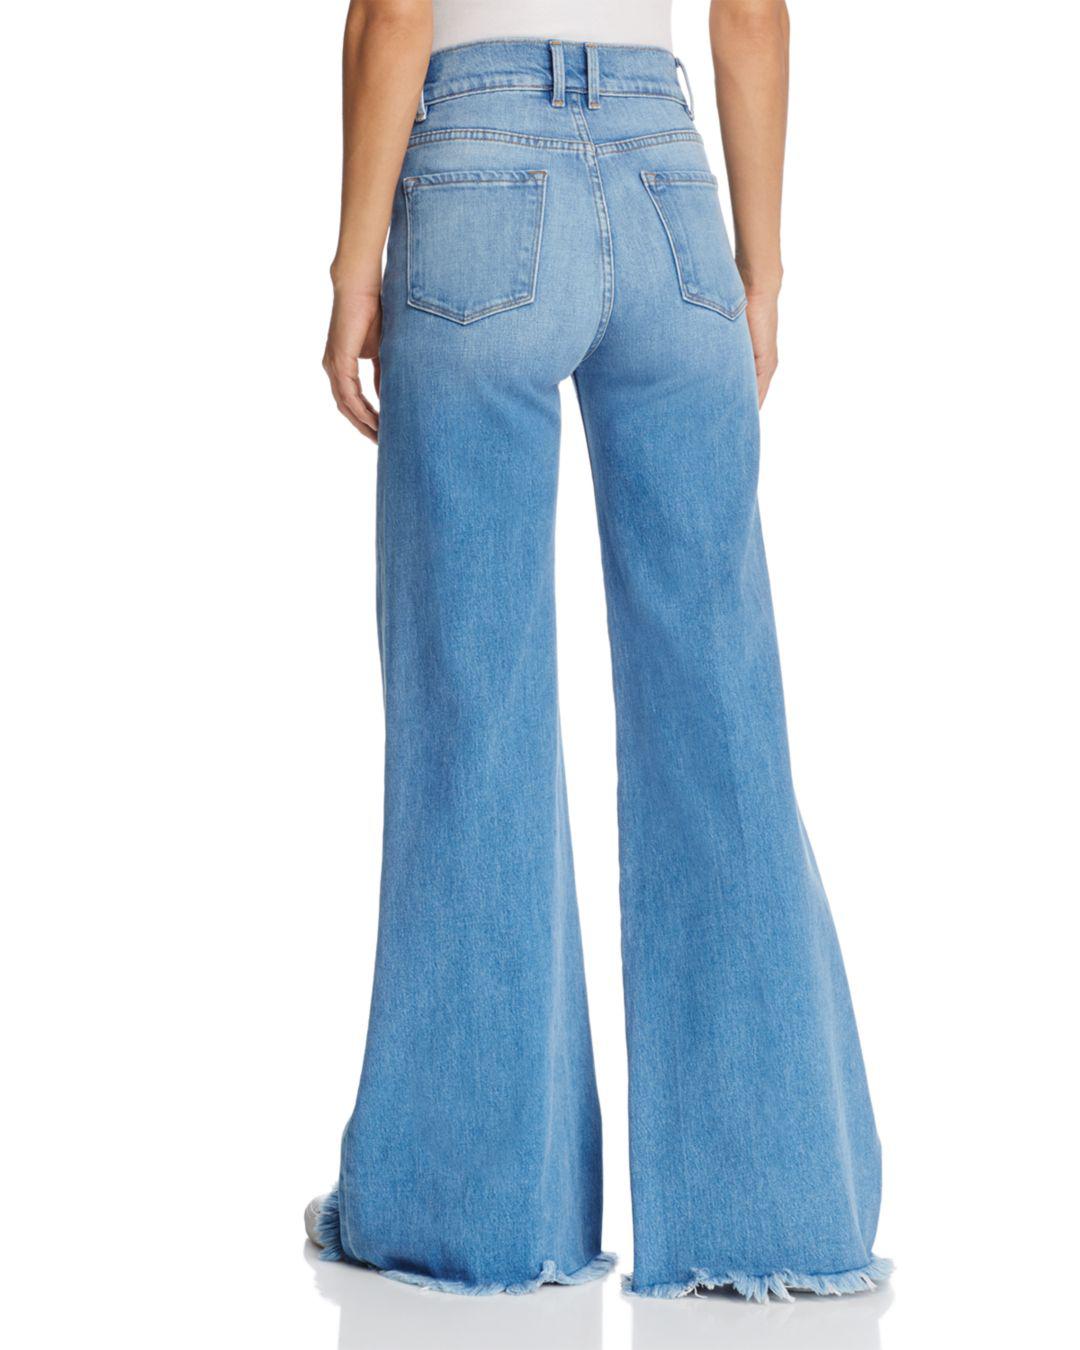 FRAME Denim Le Palazzo Jeans In Opus in Blue - Lyst